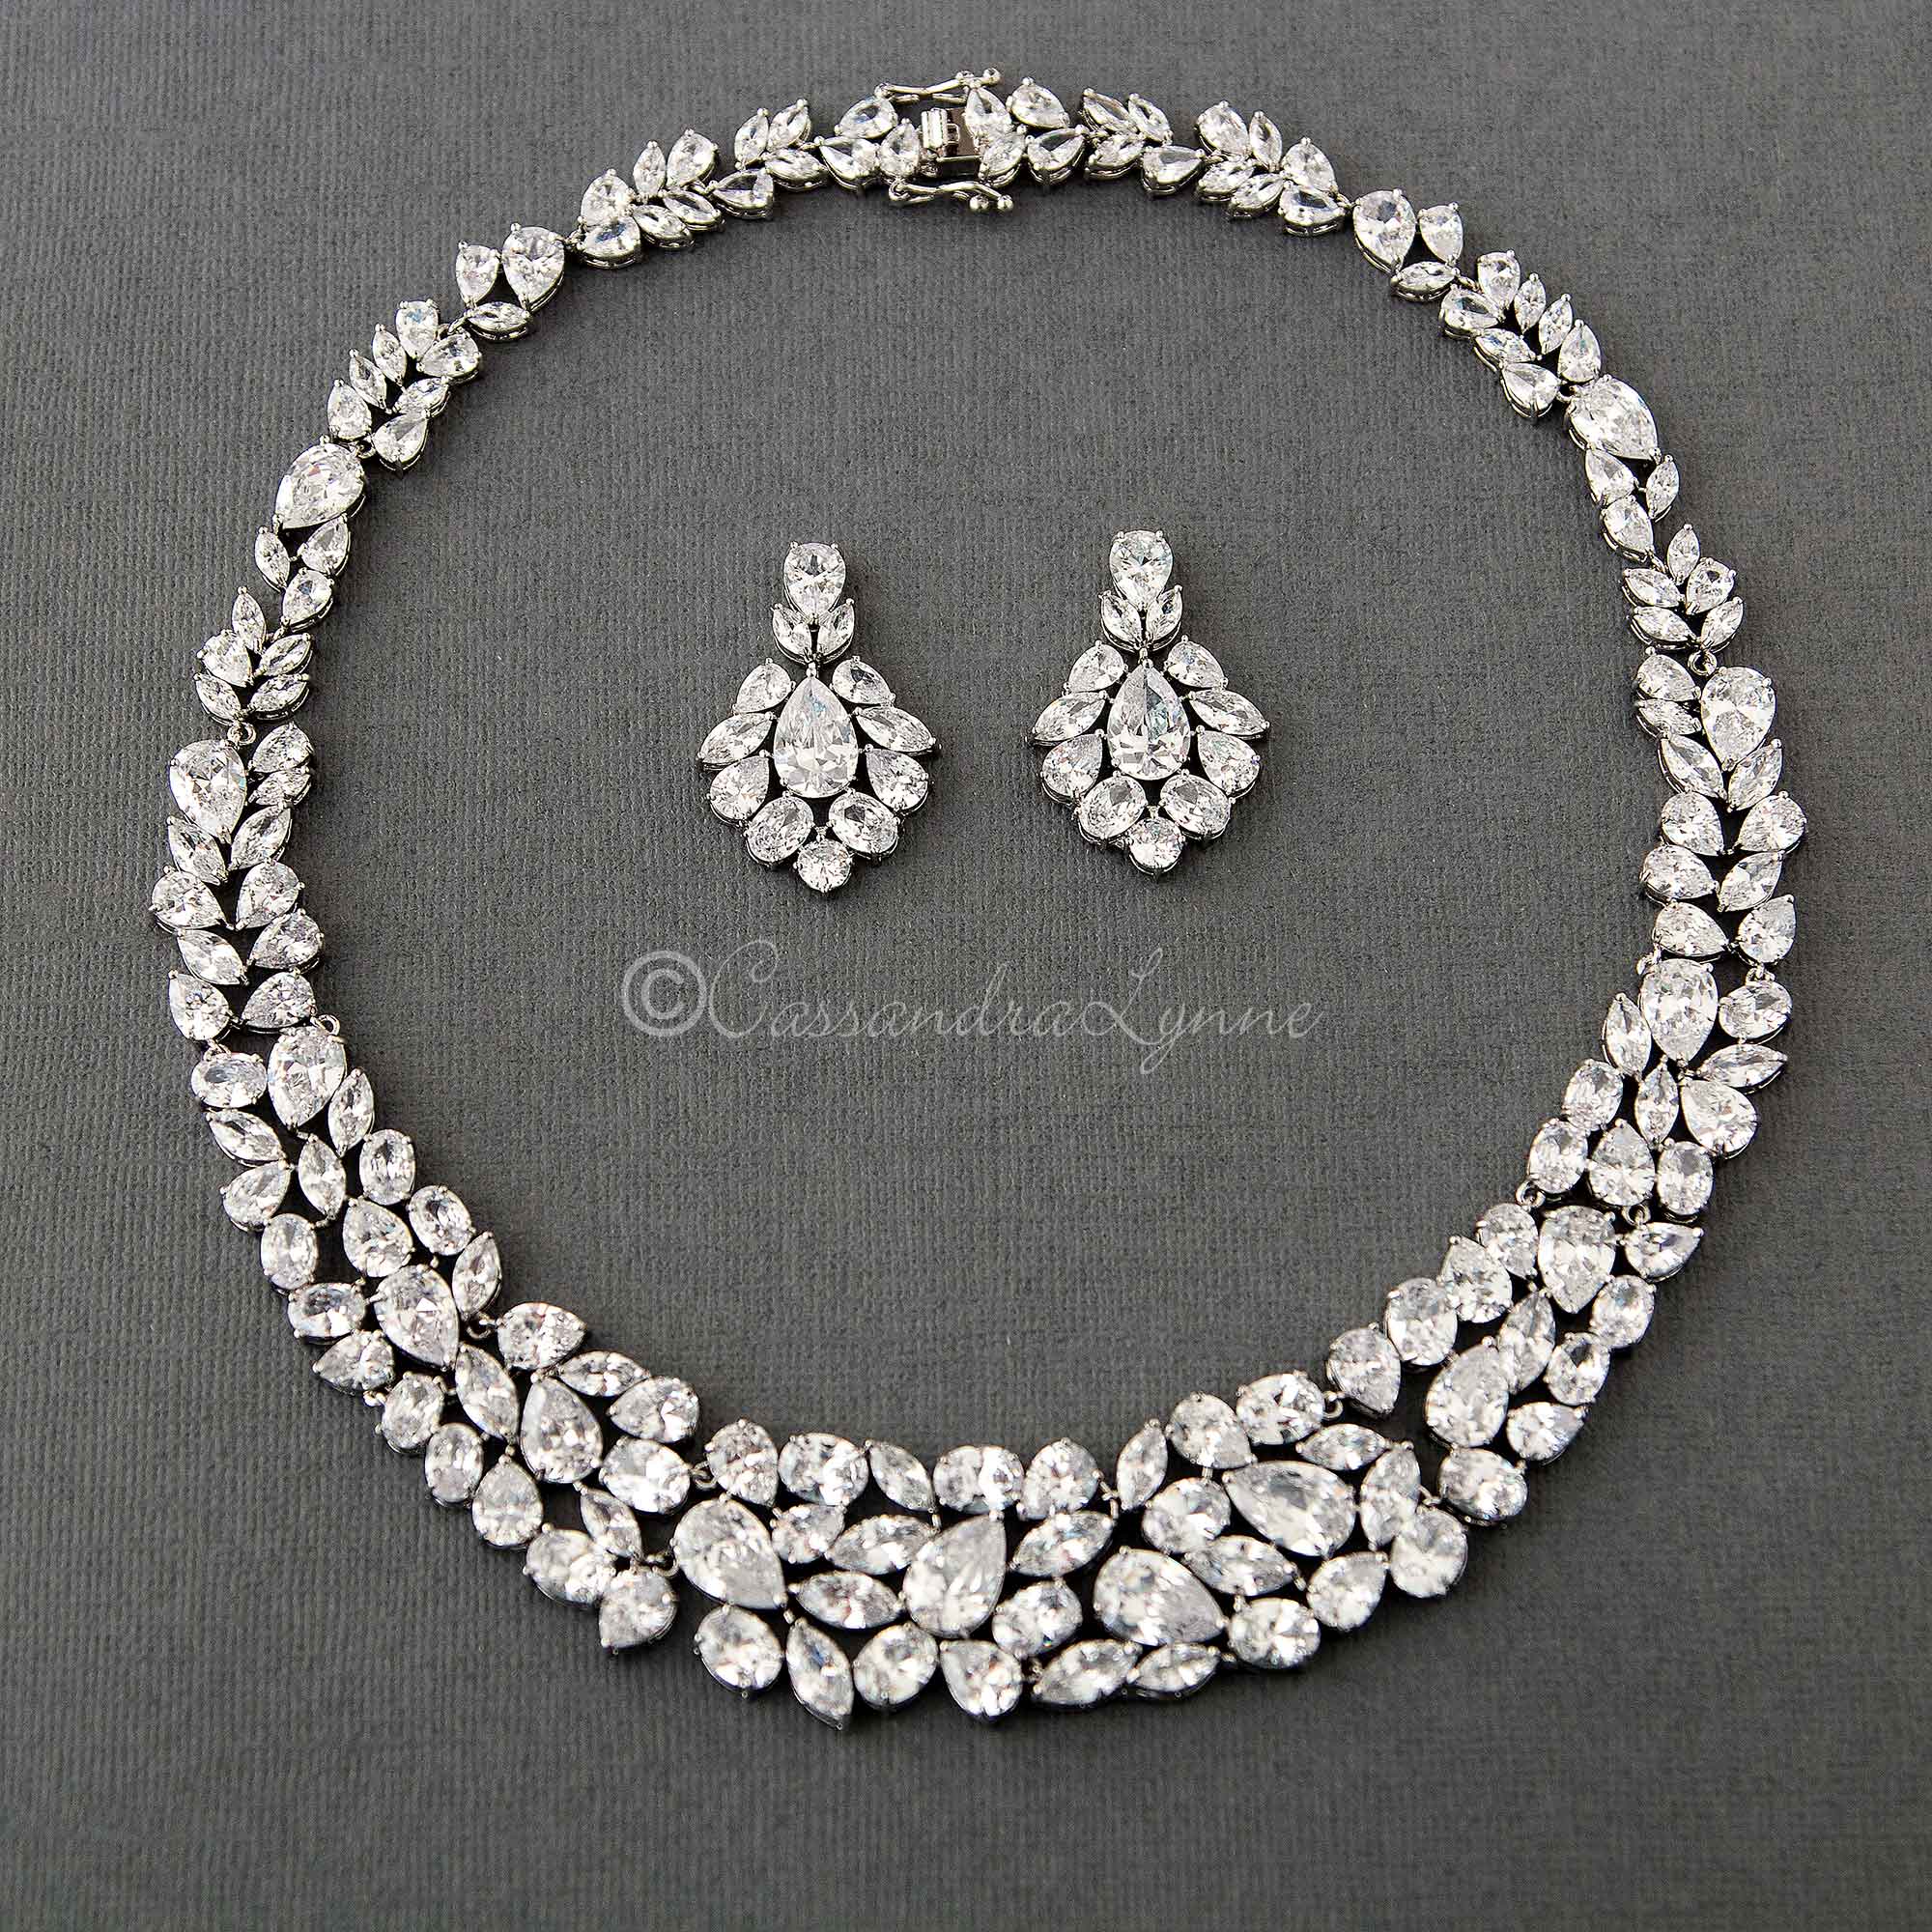 Bridal Necklace & Earring Sets at Cassandra Lynne Page 3